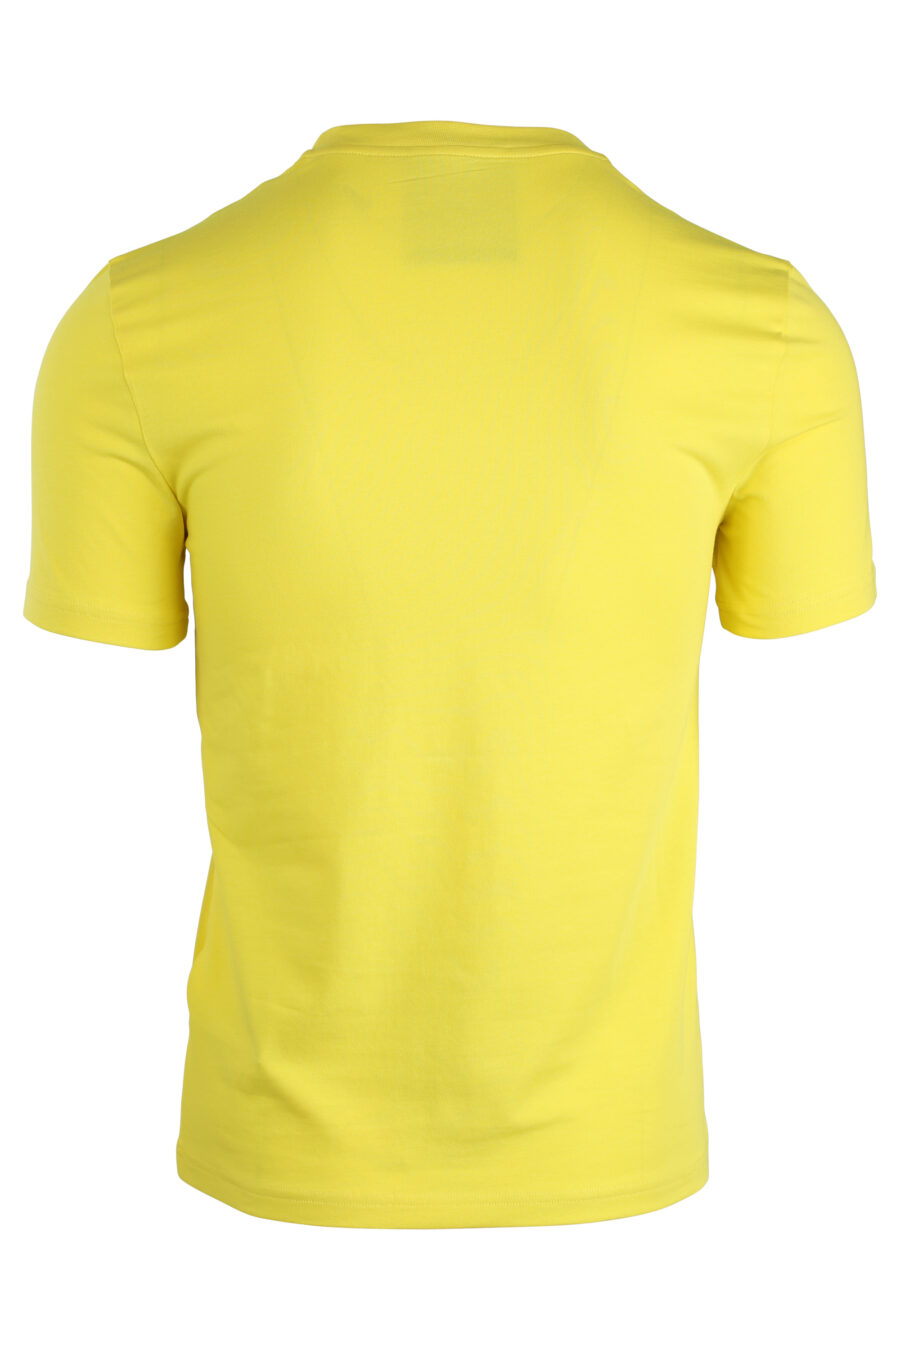 Yellow T-shirt with maxi double "smiley" logo - IMG 1675